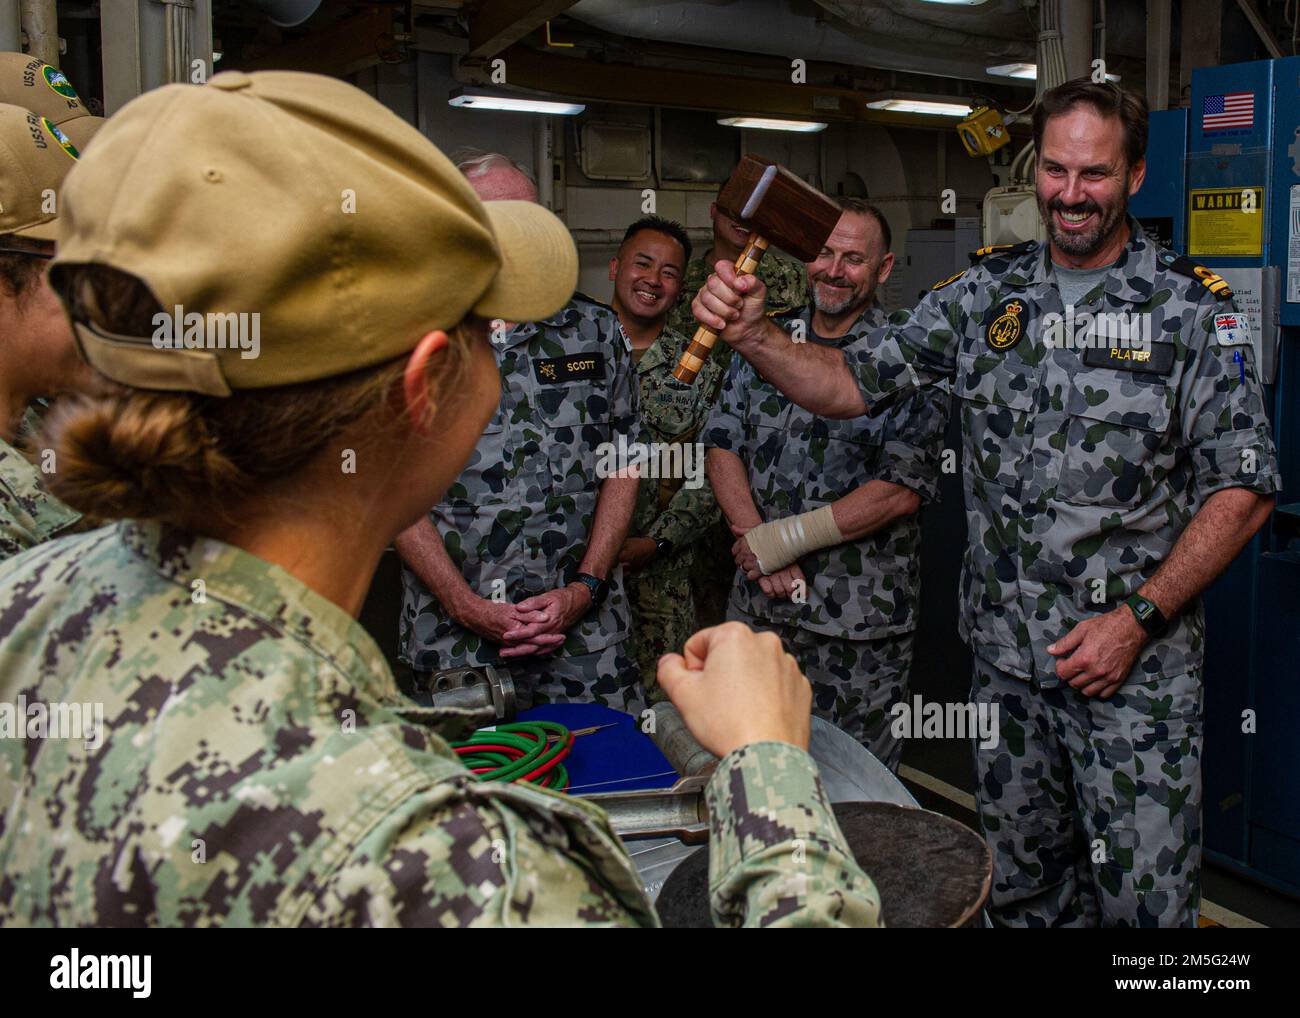 BRISBANE, Australia (March. 16, 2022) U.S. Navy Hull Technician 2nd Class Pamela Hensley, assigned the Emory S. Land-class submarine tender USS Frank Cable (AS 40), explains the capabilities of the carpentry shop onboard the ship to Royal Australian Navy Lt. Rob Plater, assigned to HMAS Moreton, during a tour of Frank Cable, March 16. Frank Cable is currently on patrol conducting expeditionary maintenance and logistics in support of national security in the U.S. 7th Fleet area of operations Stock Photo